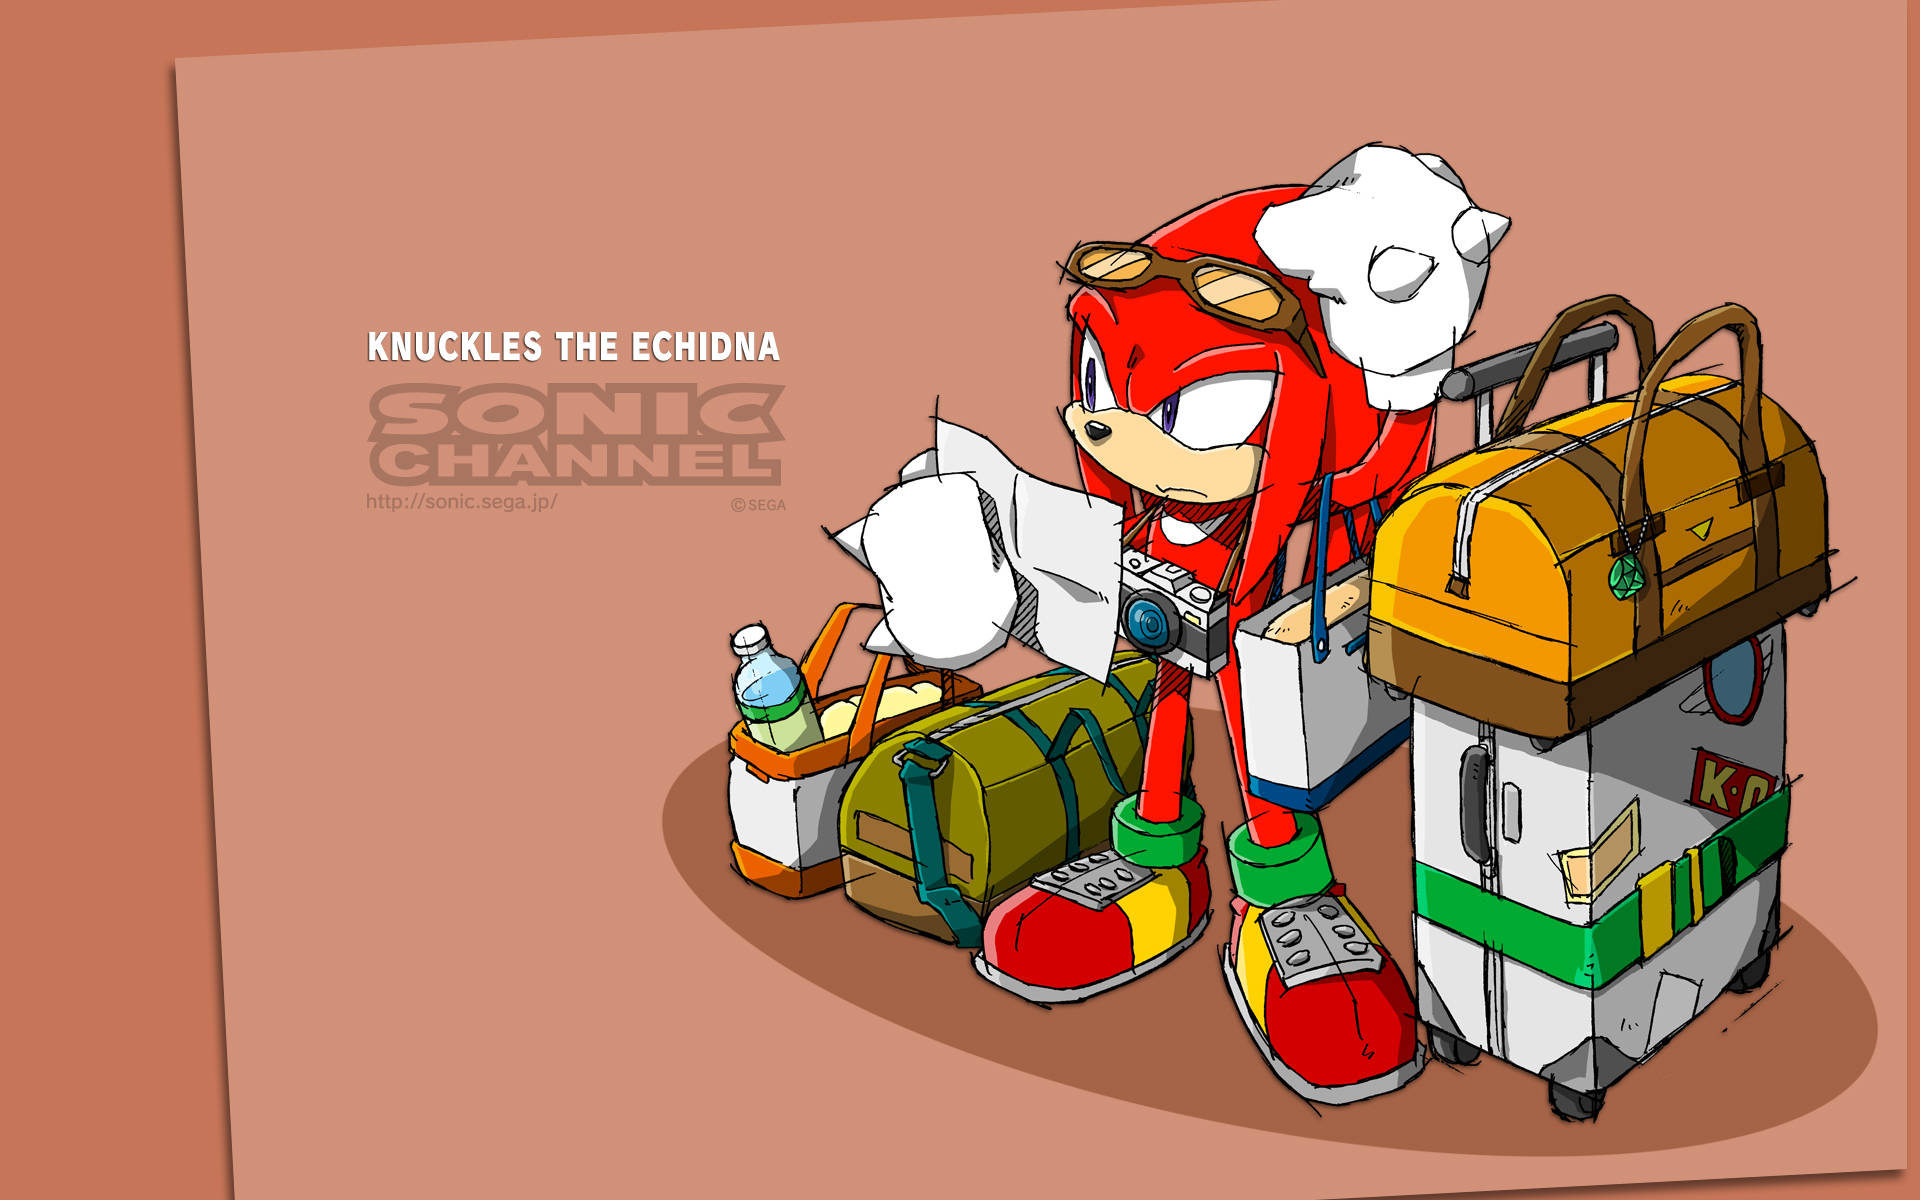 Caption: Dynamic Knuckles The Echidna In Action